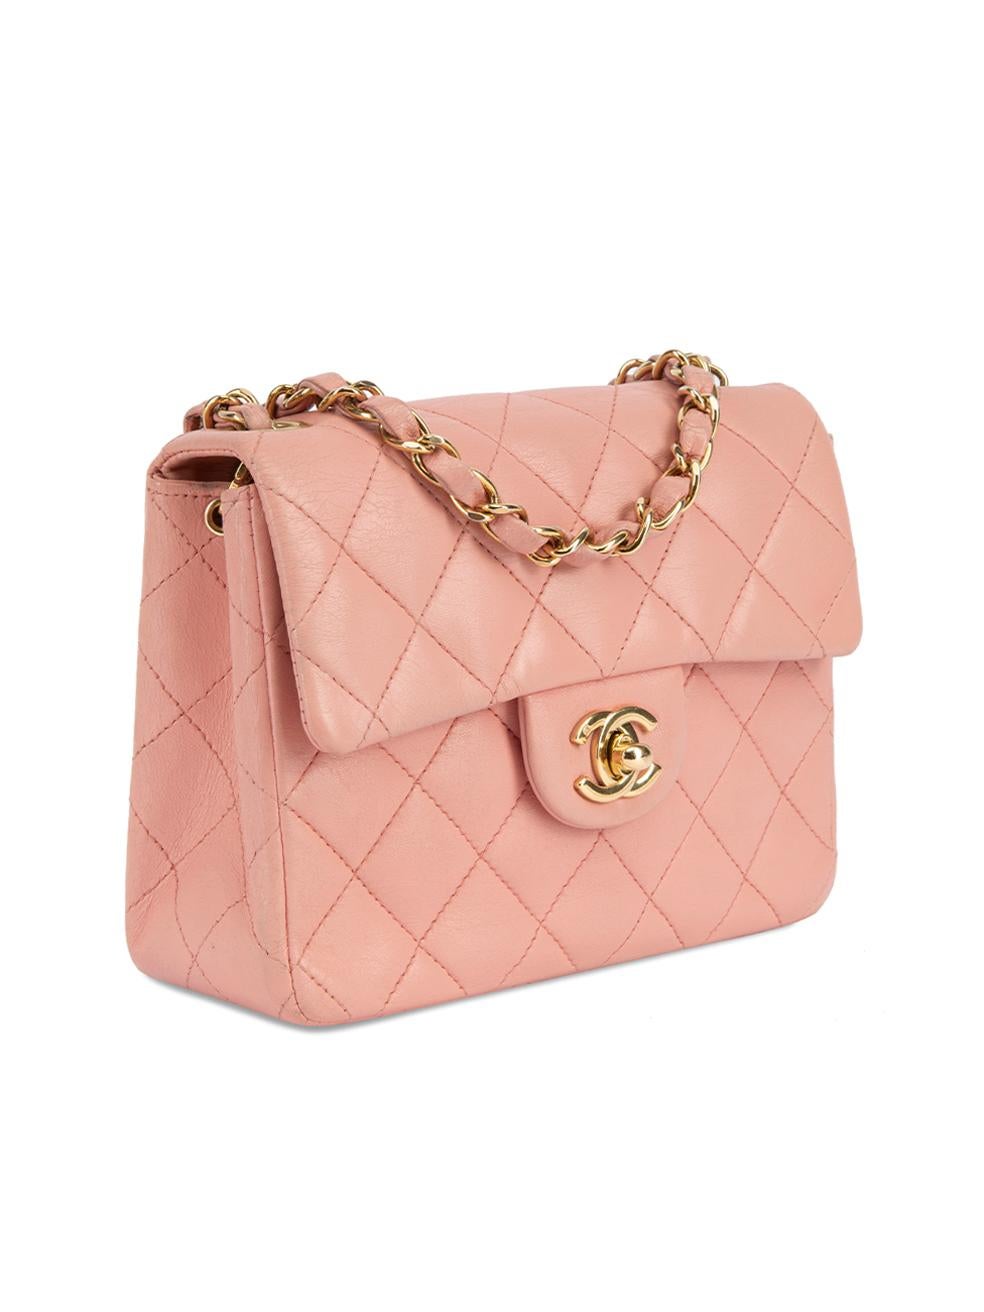 CONDITION is Very good. Minimal wear to bag is evident. Minimal wear to to the leather exterior and bag strap where creasing and scuffs can be seen on this used Chanel designer resale item.   Details  2004/2005 Sakura pink Leather Mini flap bag